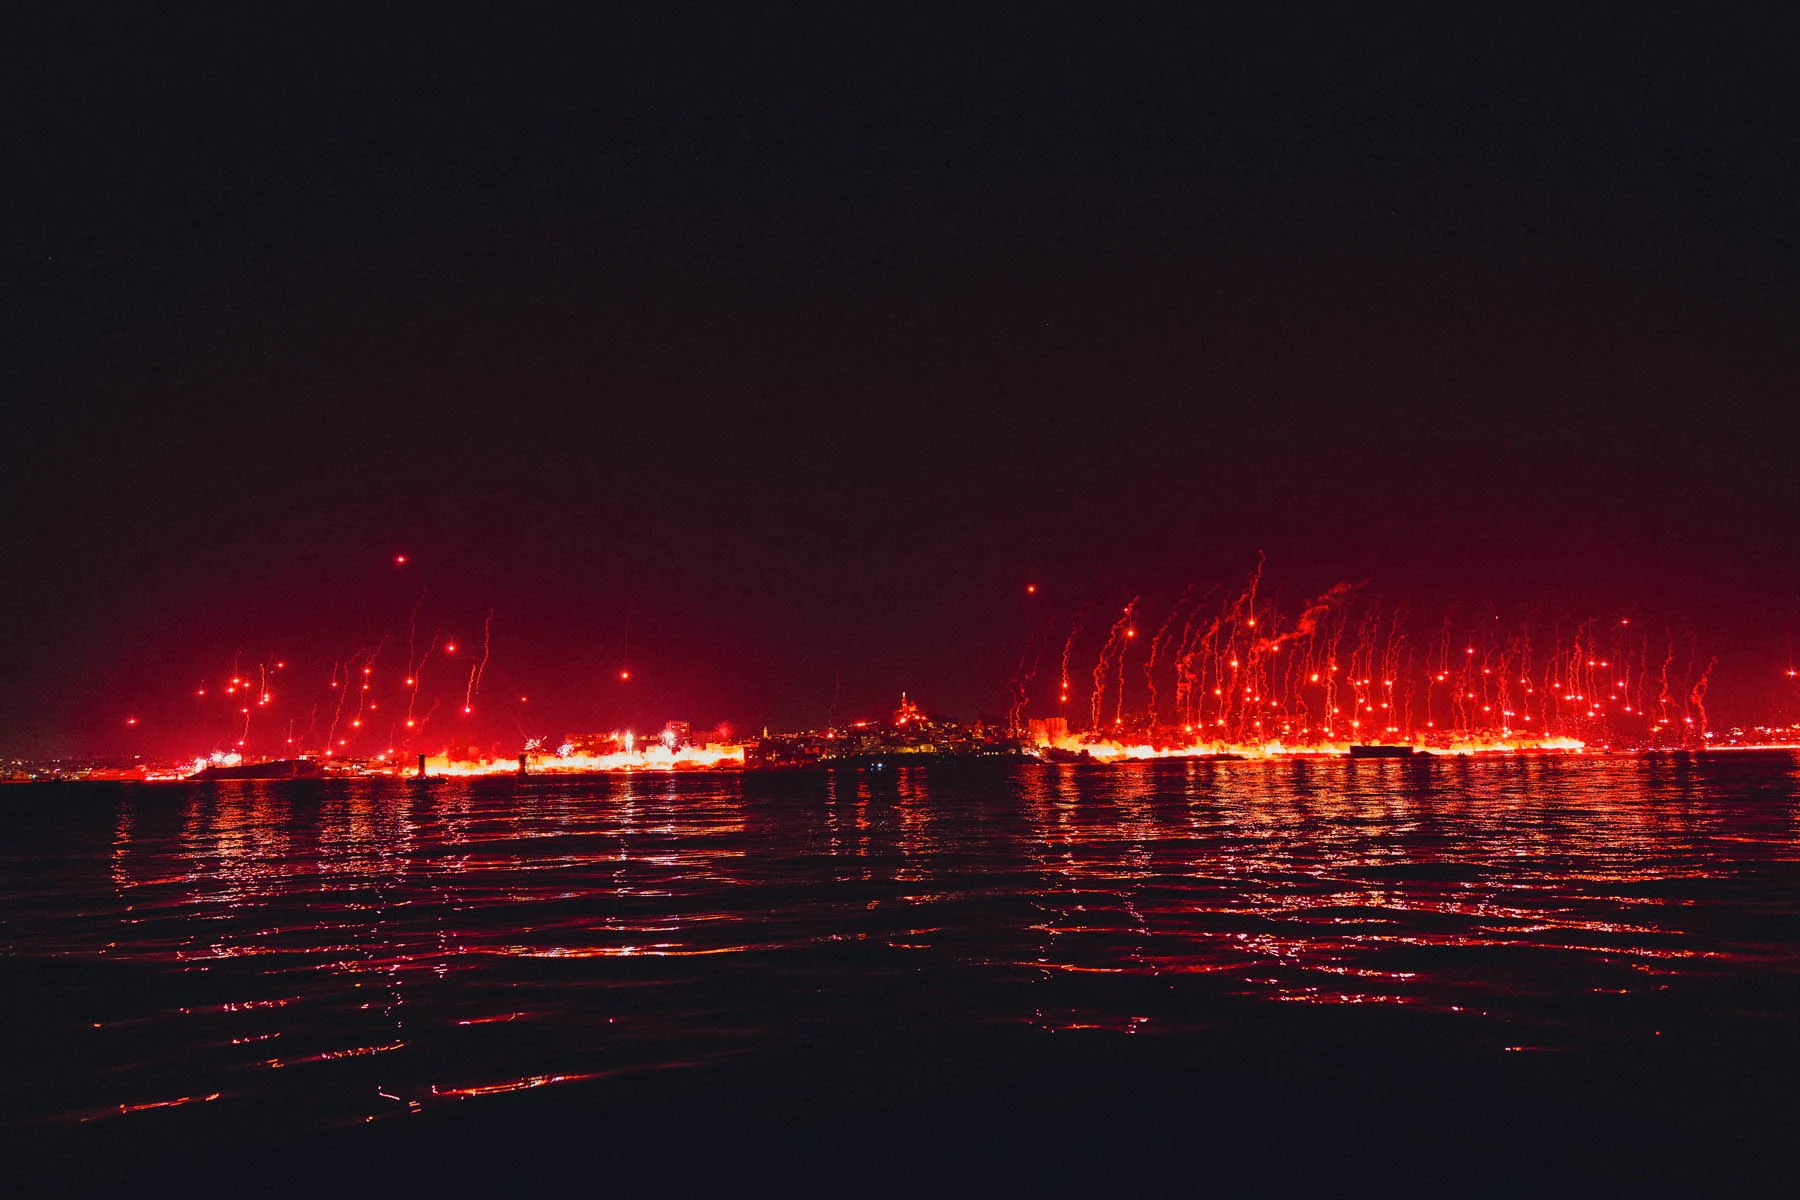 A photograph taken from a boat at night, with the waterline lit up by red fireworks and flames as part of a celebration around the anniversary of a sporting event in the field of football